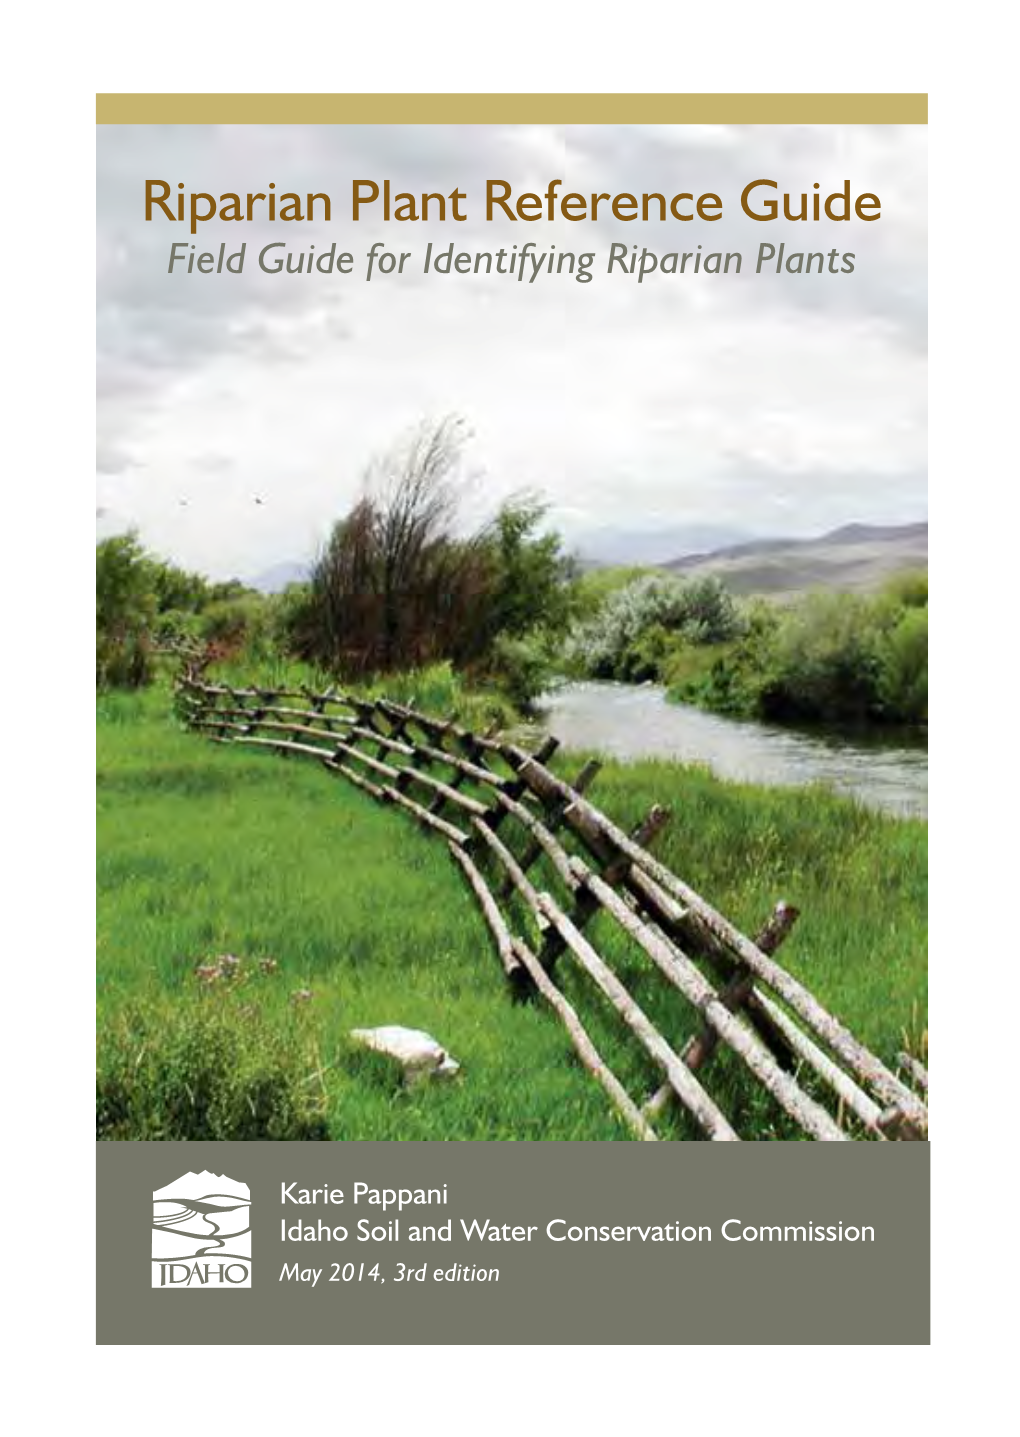 Riparian Plant Reference Guide, 2014